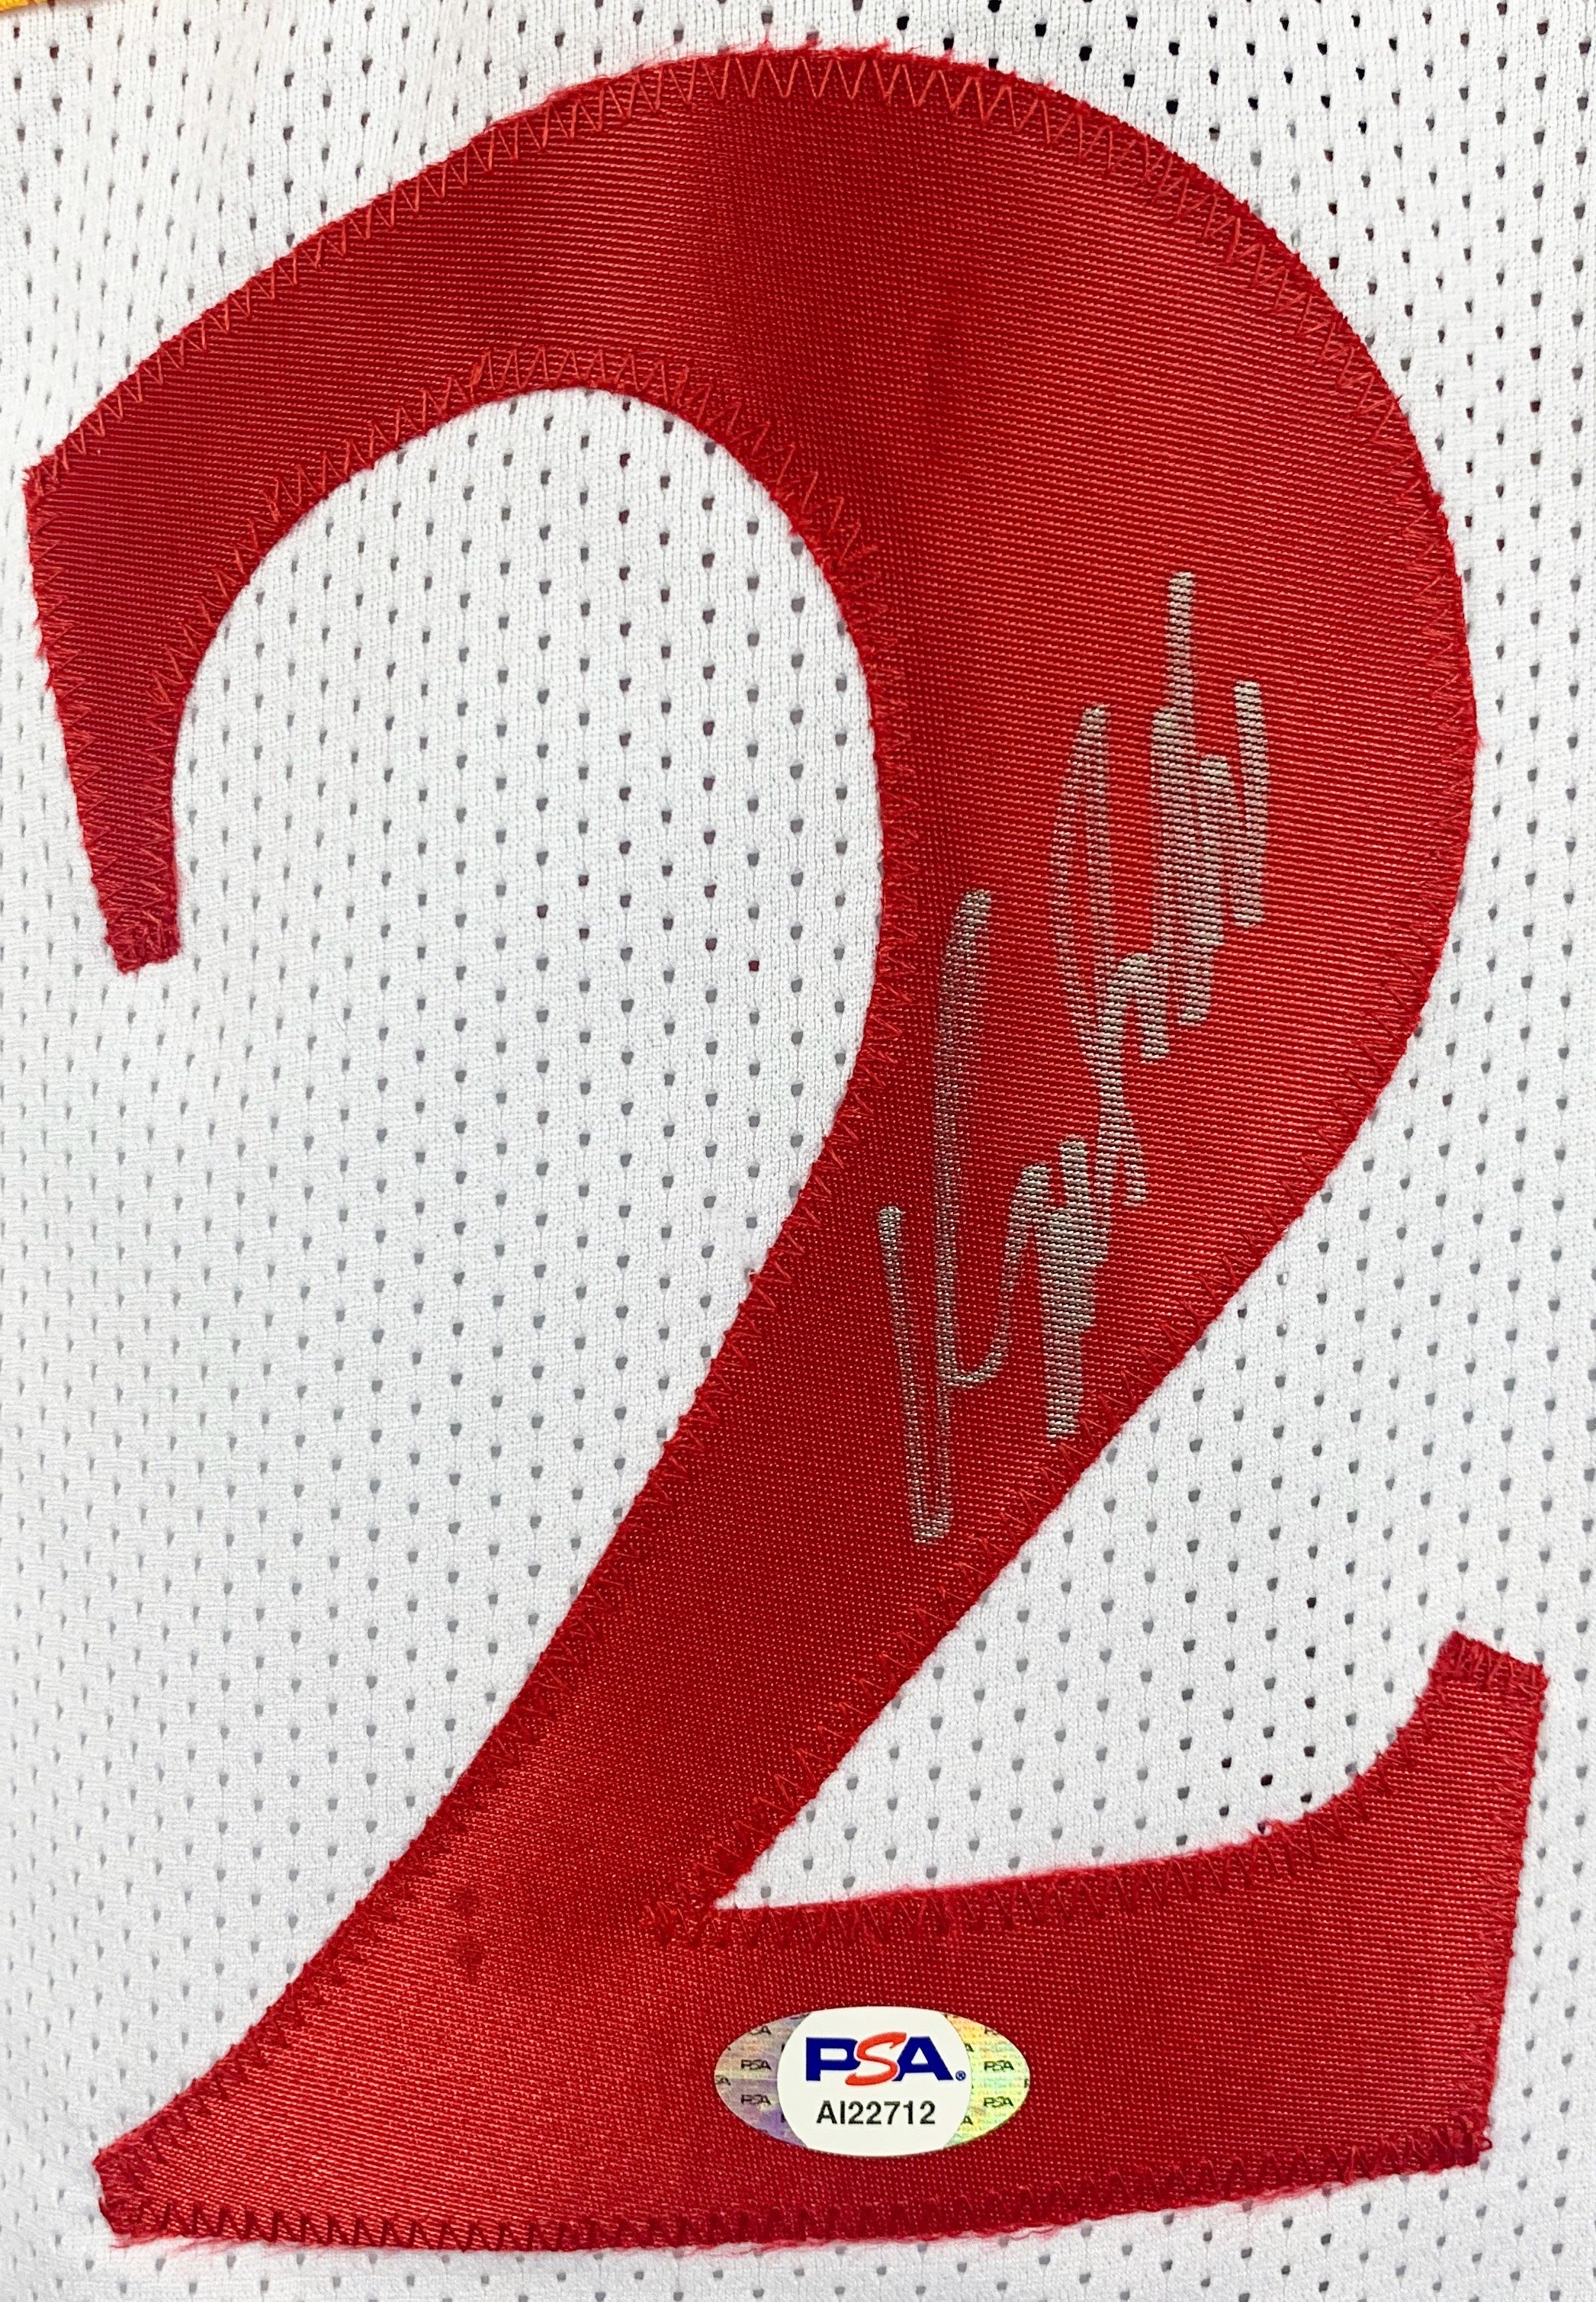 Dominique Wilkins Signed Jersey - CharityStars